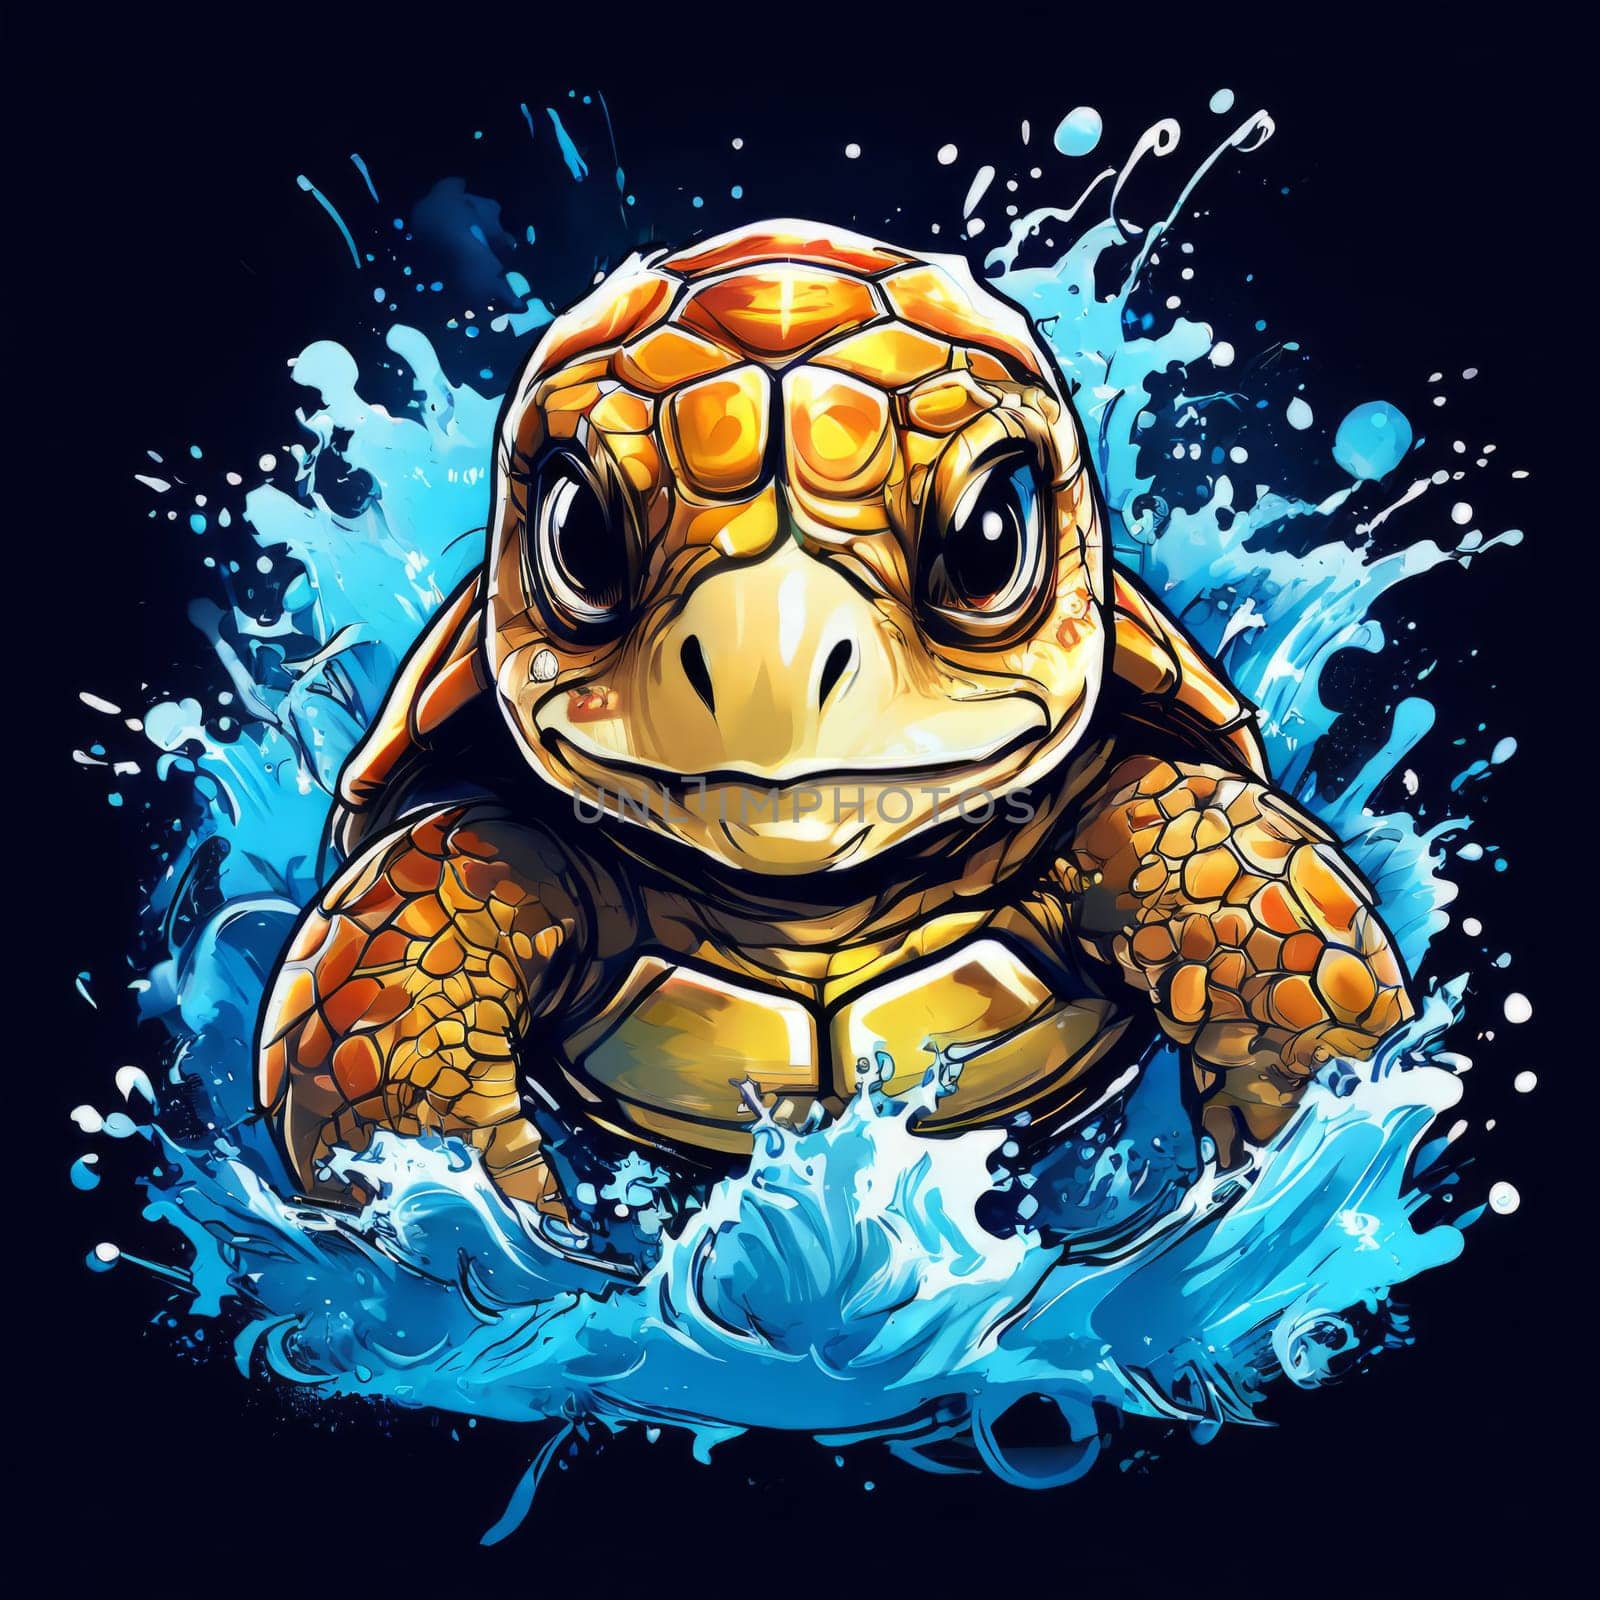 Majestic sea turtle gracefully gliding through crystal clear waters of ocean. For educational materials for kids, game design, animated movies, tourism, stationery, Tshirt design, clothing design. by Angelsmoon